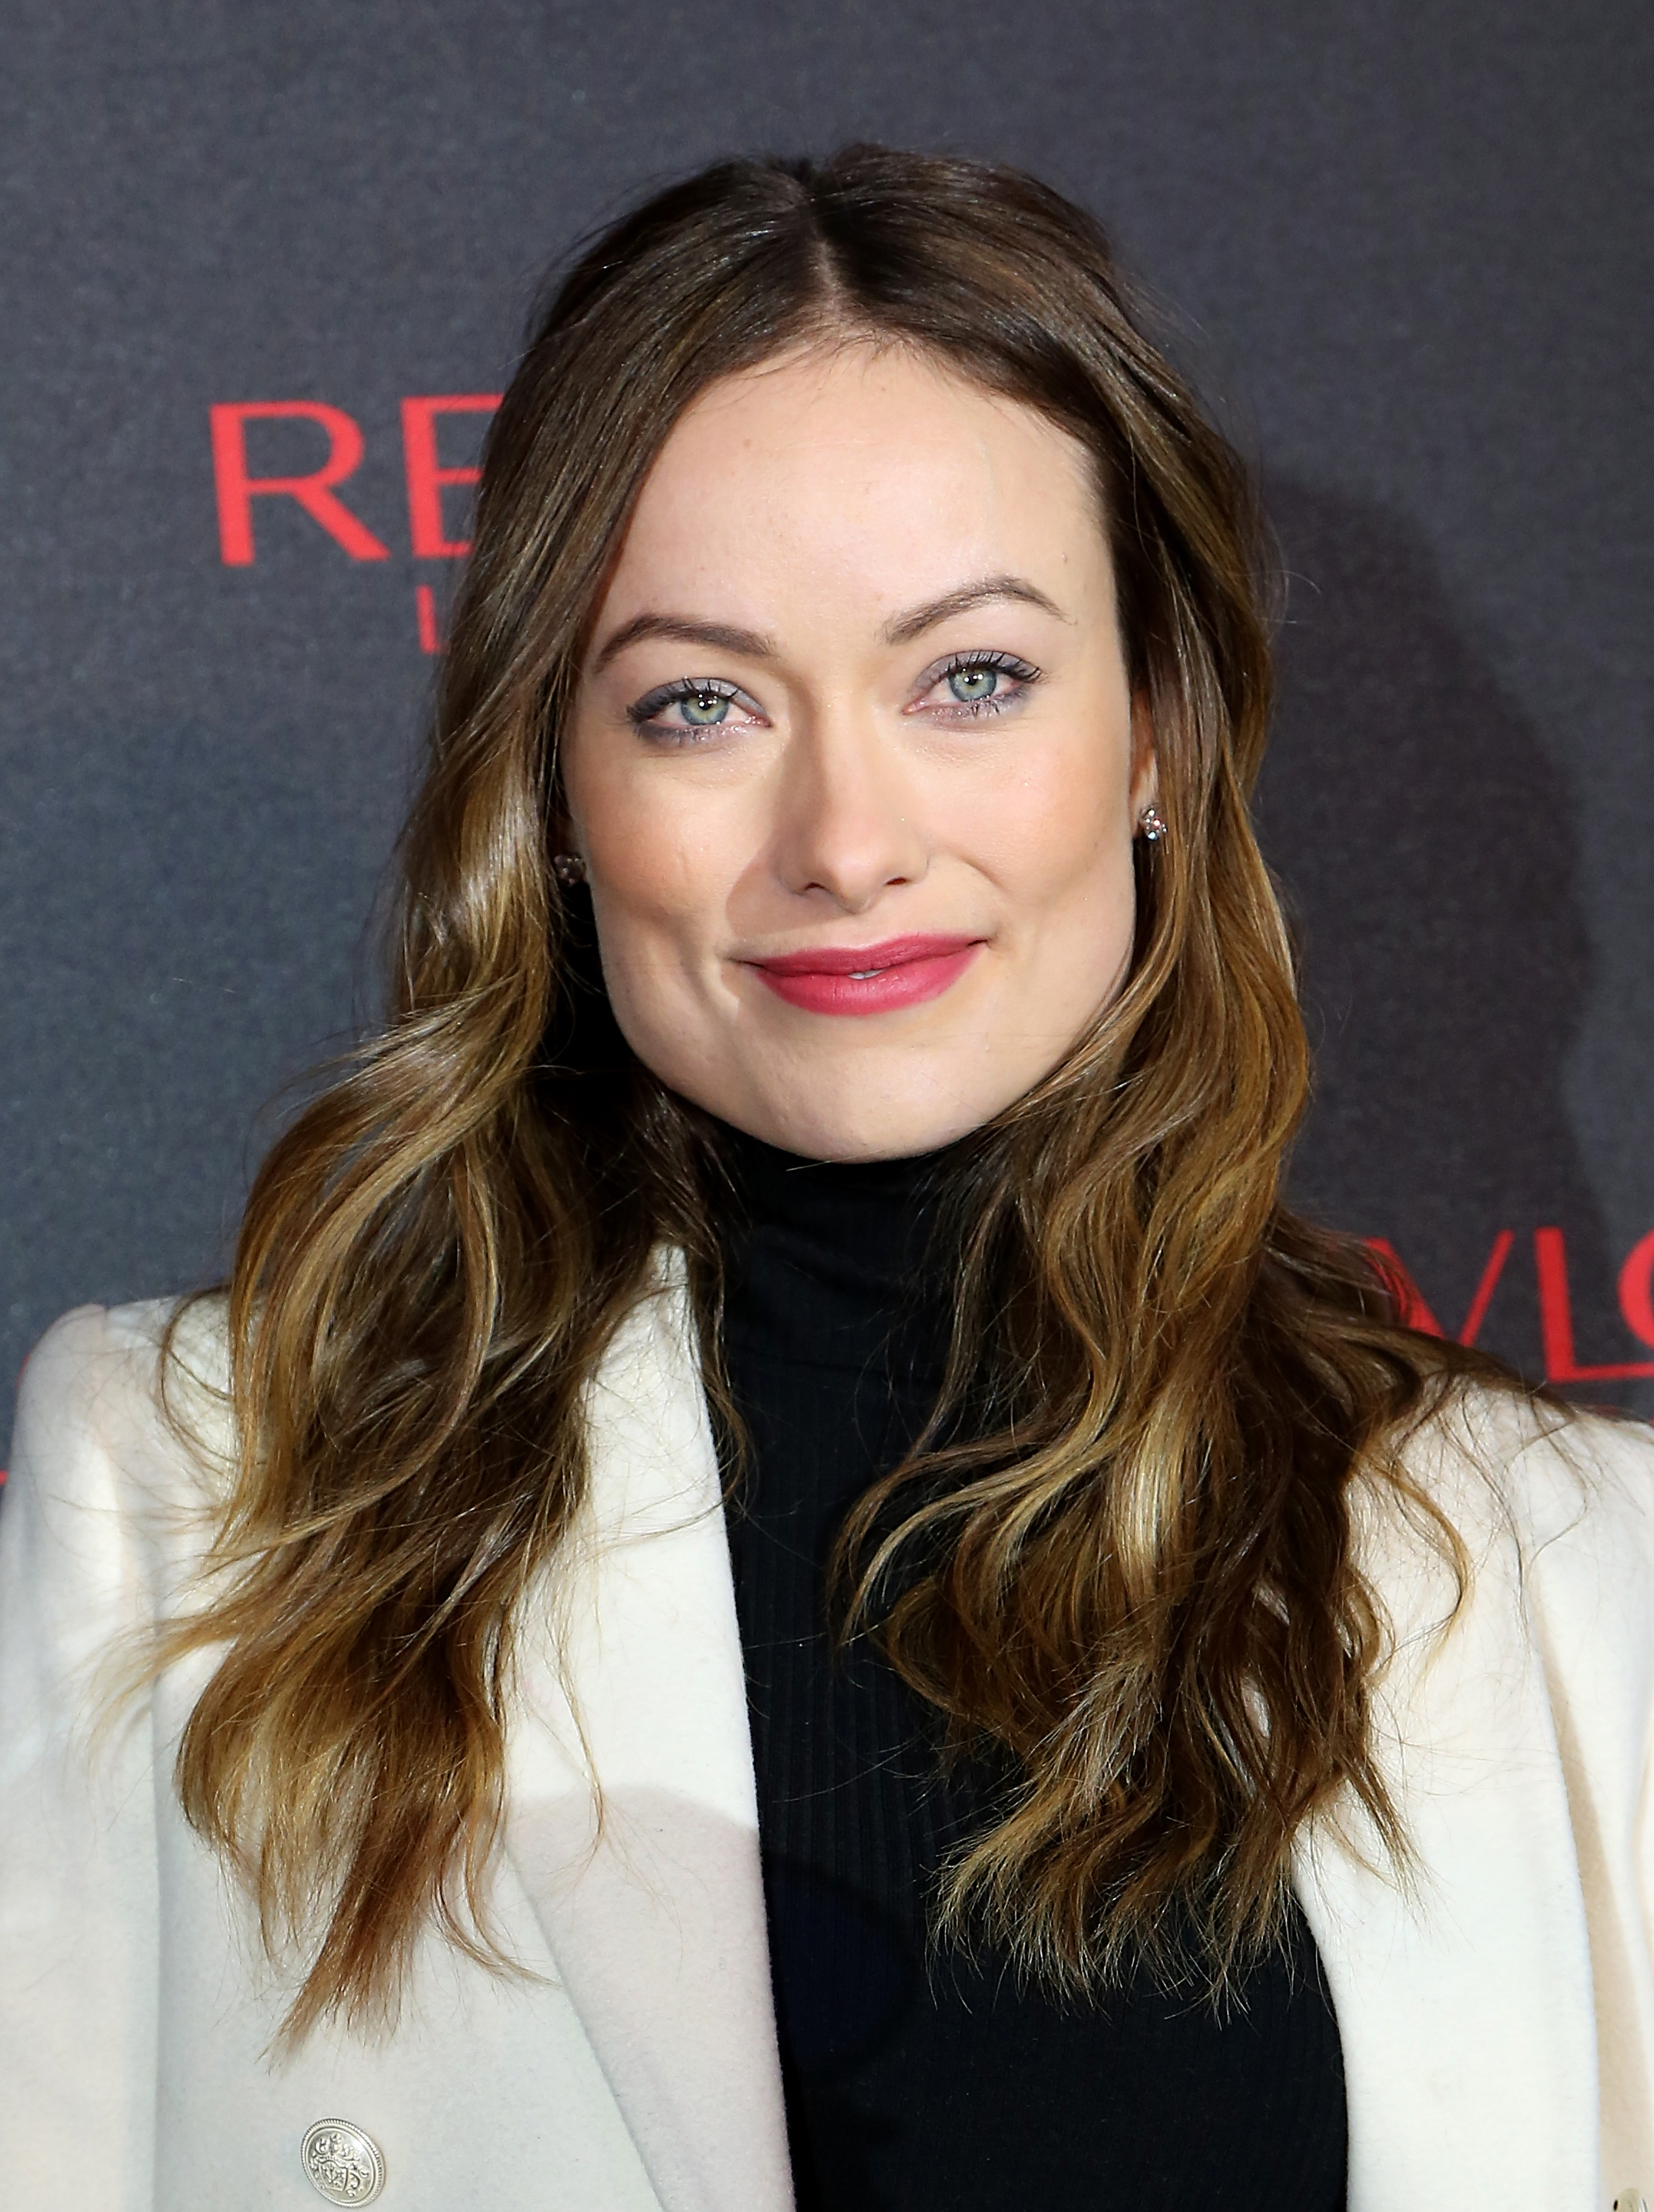 Olivia Wilde attends the  Love Is On  campaign launch event on Nov. 18, 2014 in New York City.